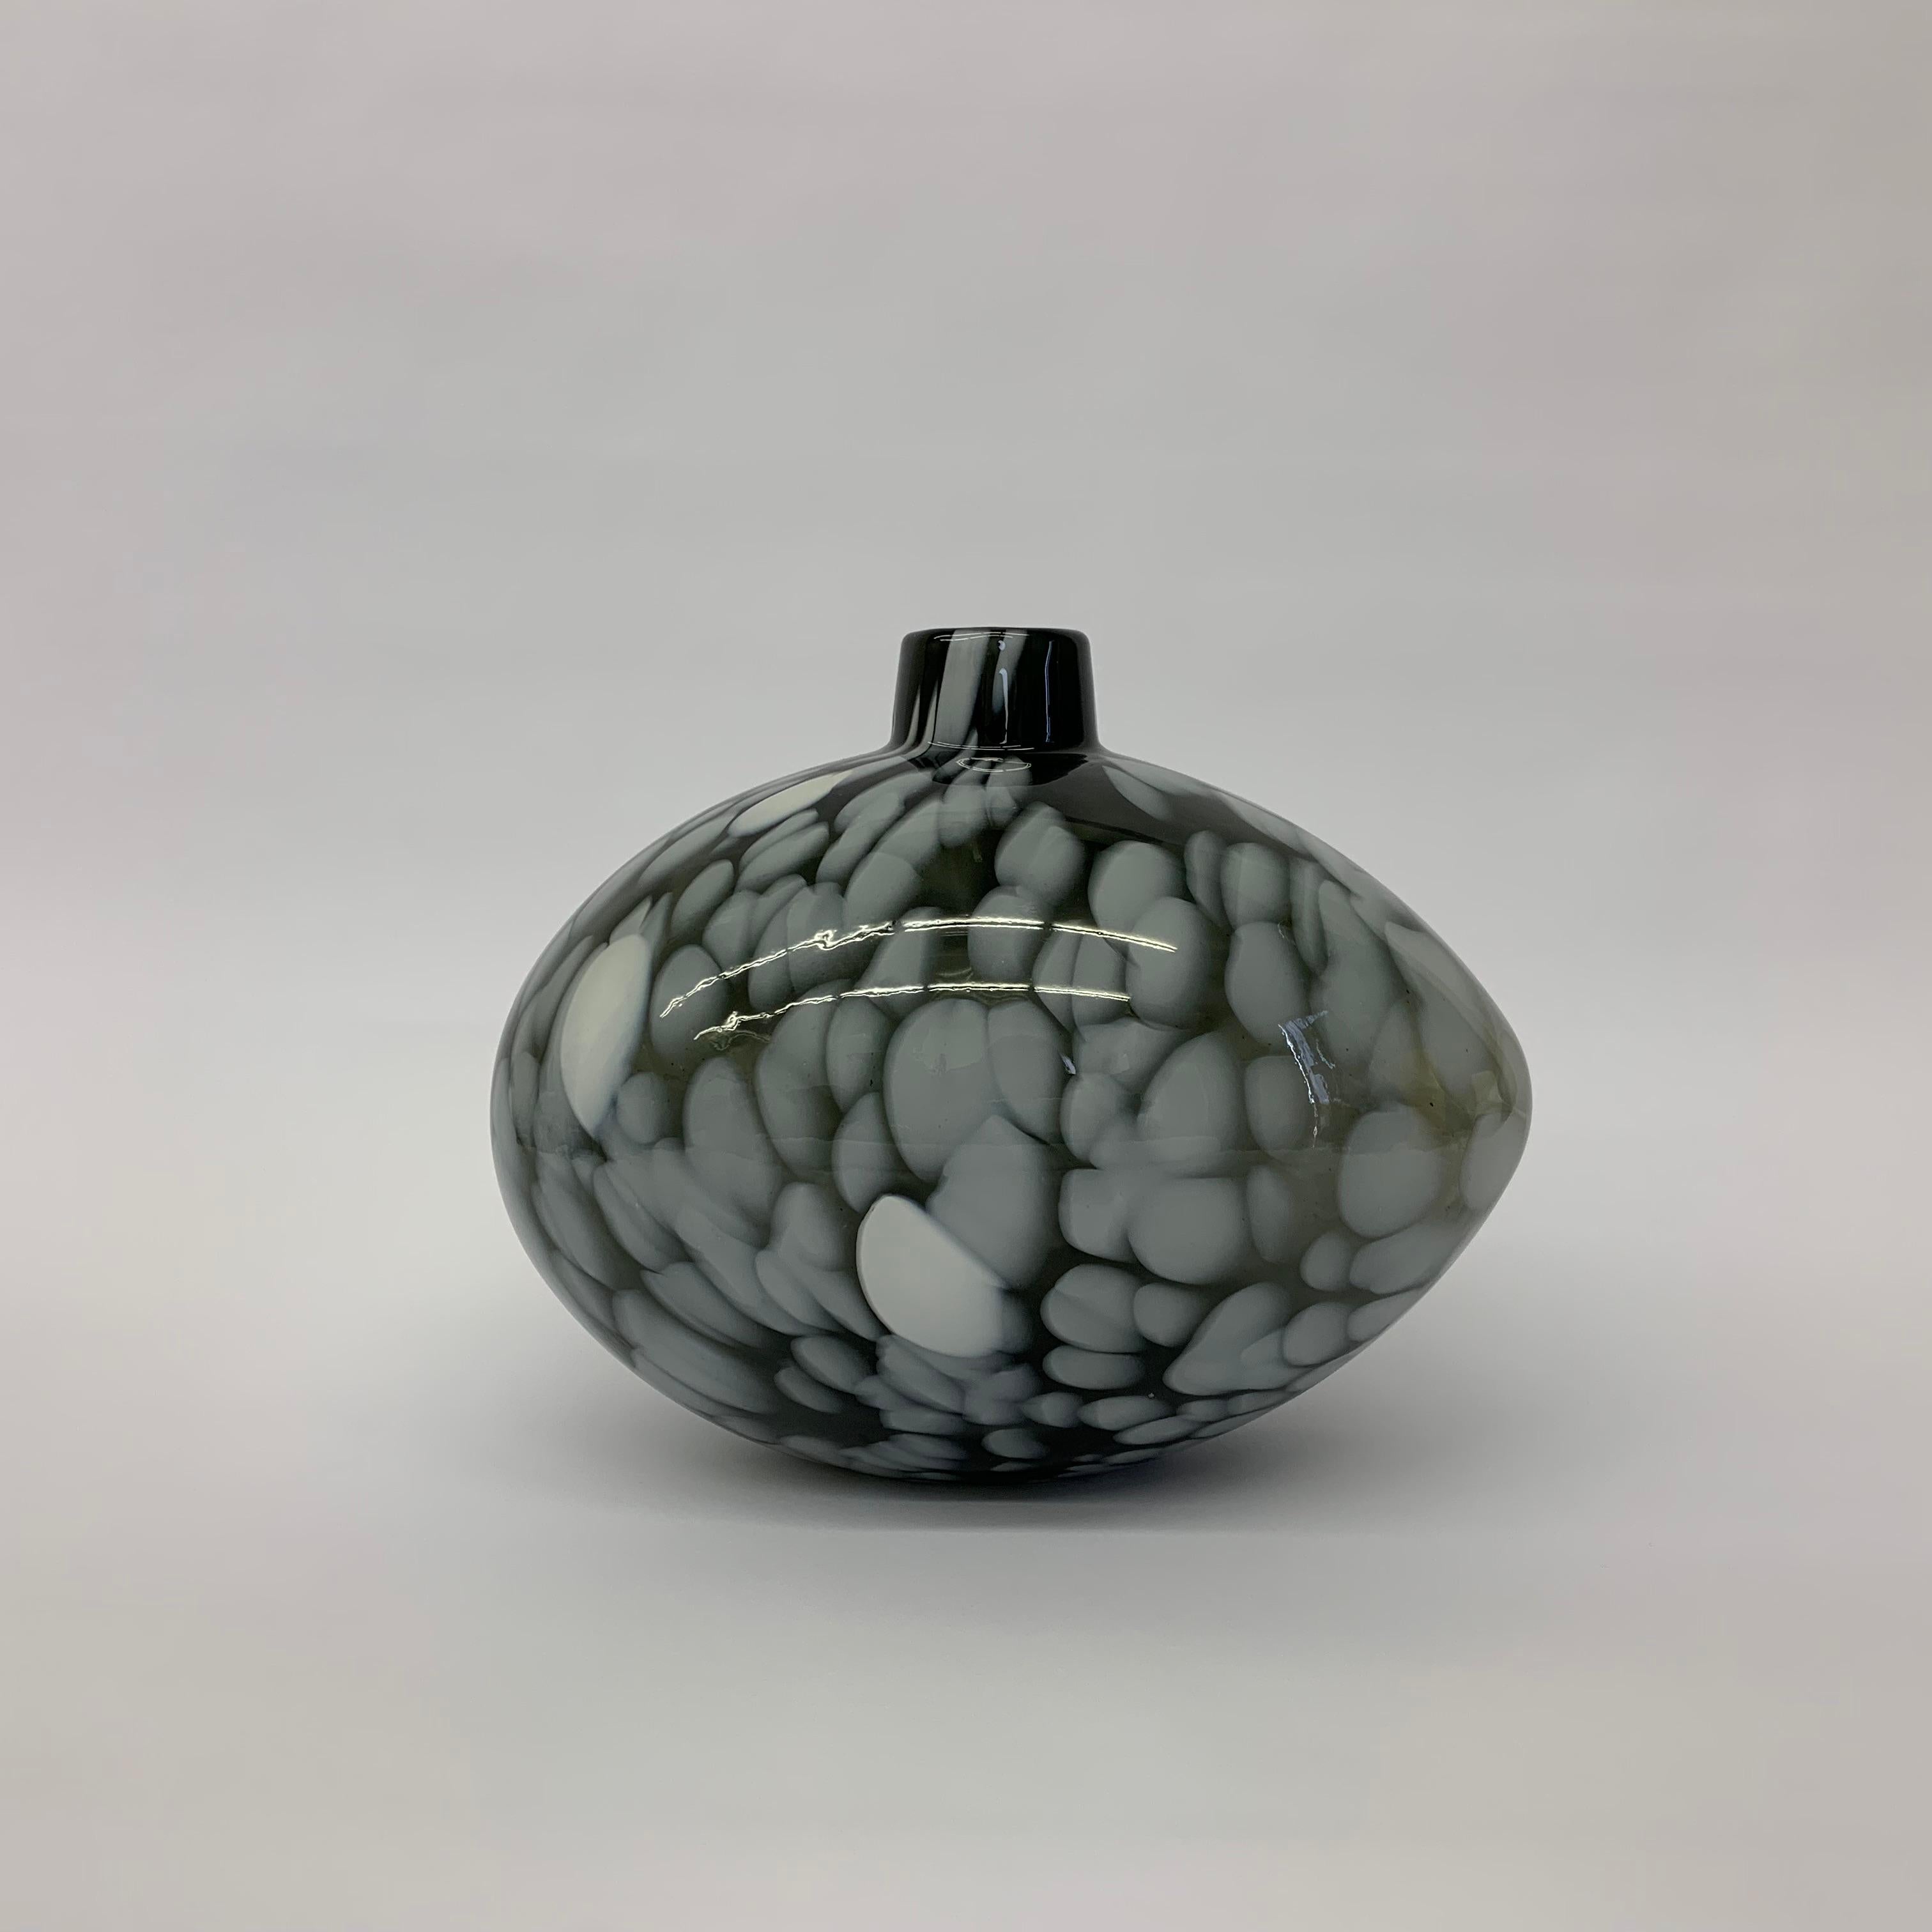 Ann Wahlstrom was retained by Kosta Boda in 1986 and worked out of the Kosta Glassworks. Her designs often reflect a simple fragility in the glass melt combined with the freezing of the introduction of color and design in the hardening process. This